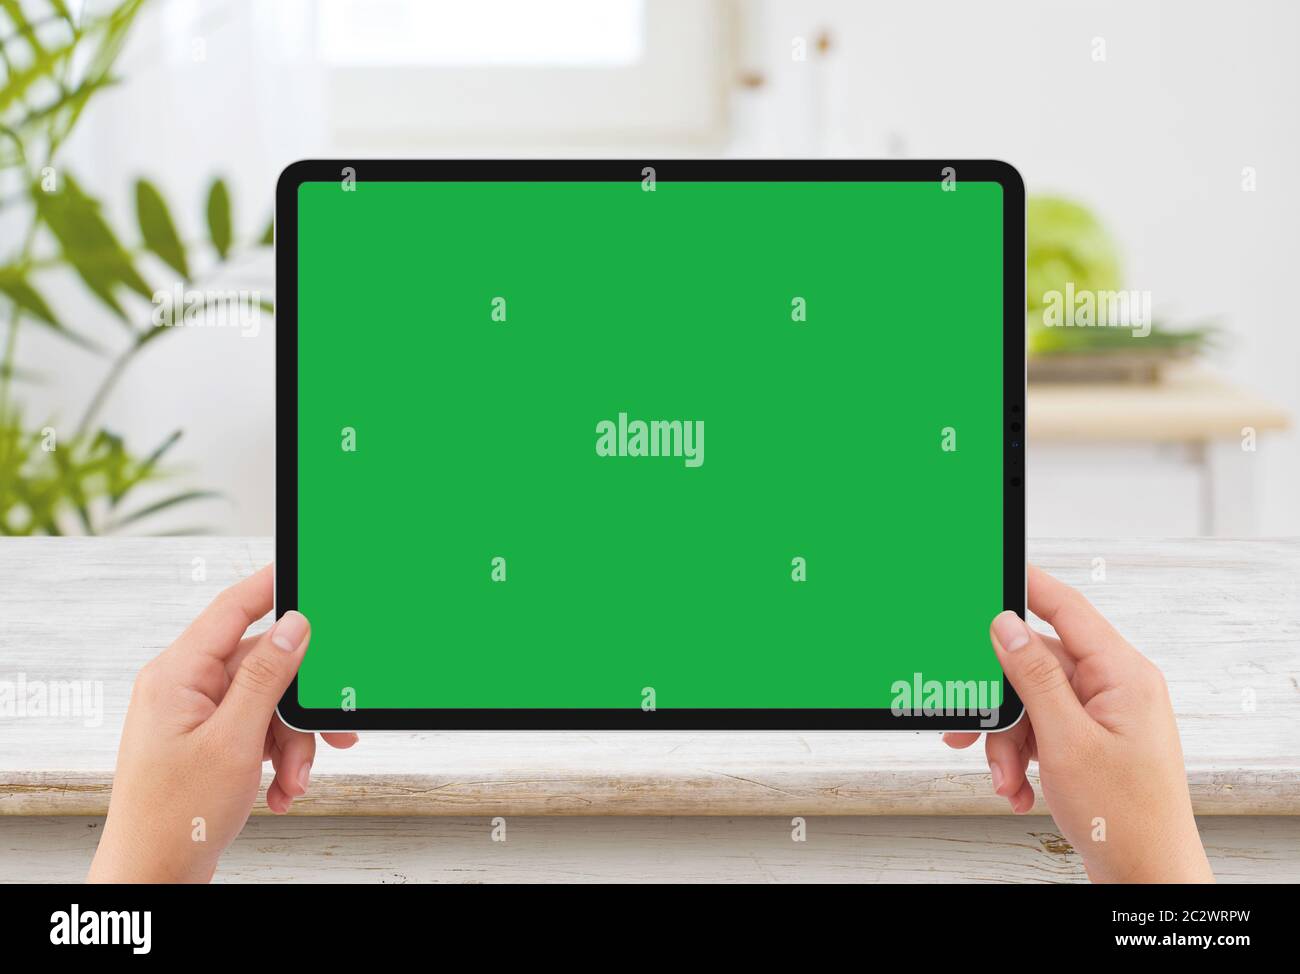 Isolated human two hands holding black tablet media device with white green screen mockup and wooden table in kitchen Stock Photo